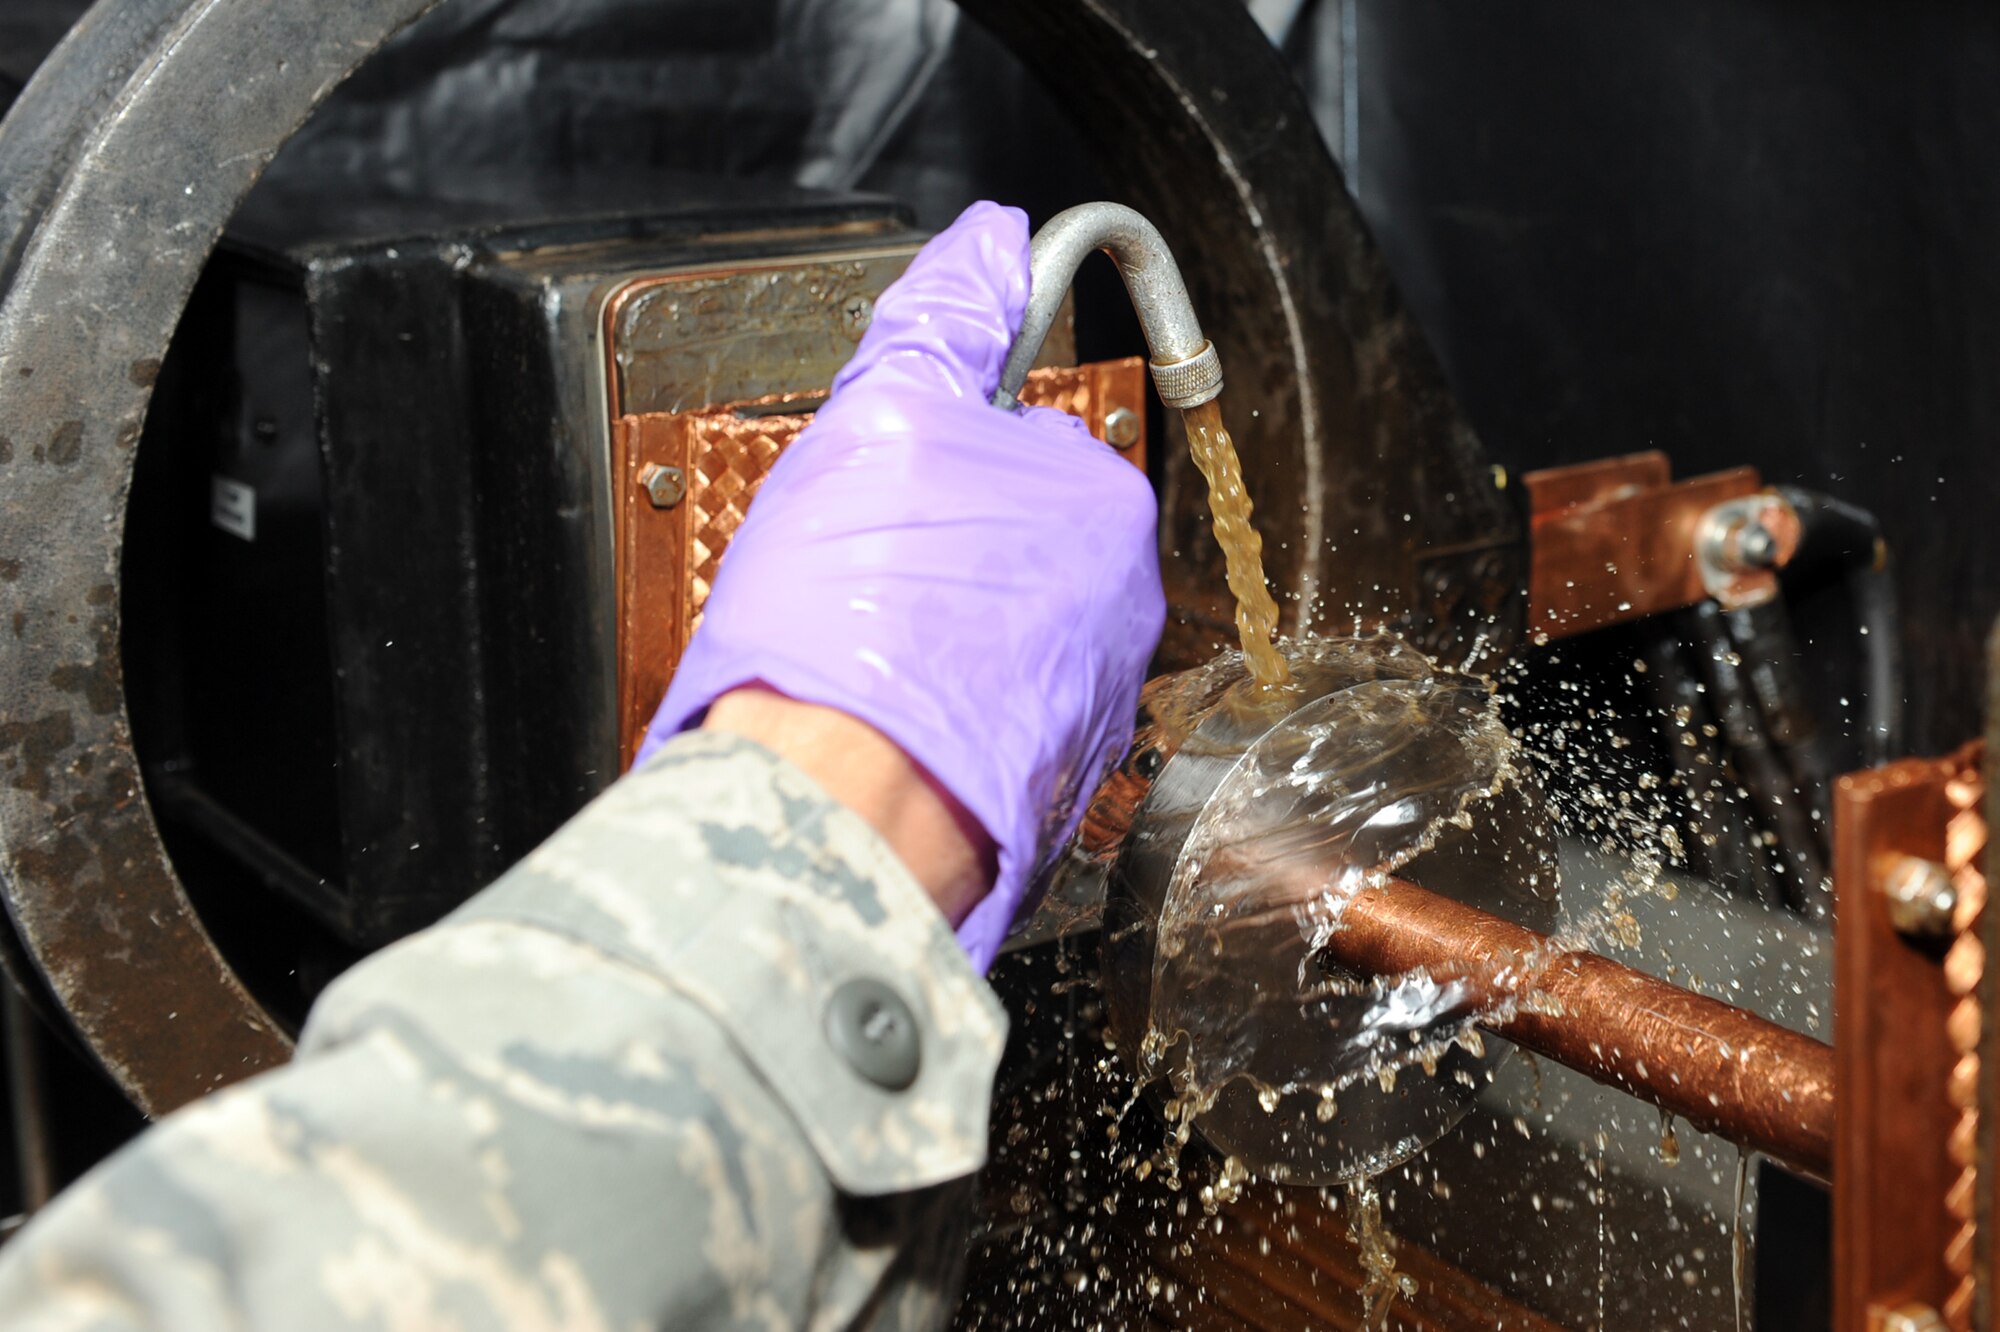 Airman 1st Class Quinten Roehm, 19th Equipment Maintenance Squadron non-destructive inspection apprentice, sprays a magnetic particle solution June 8 on a ketos ring while magnetizing it during a magnetic particle inspection at the base non-destructive inspection lab. The ketos ring is used to run a systems check on the performance of the magnetic particle inspection system. (U.S. Air Force photo by Senior Airman Ethan Morgan)